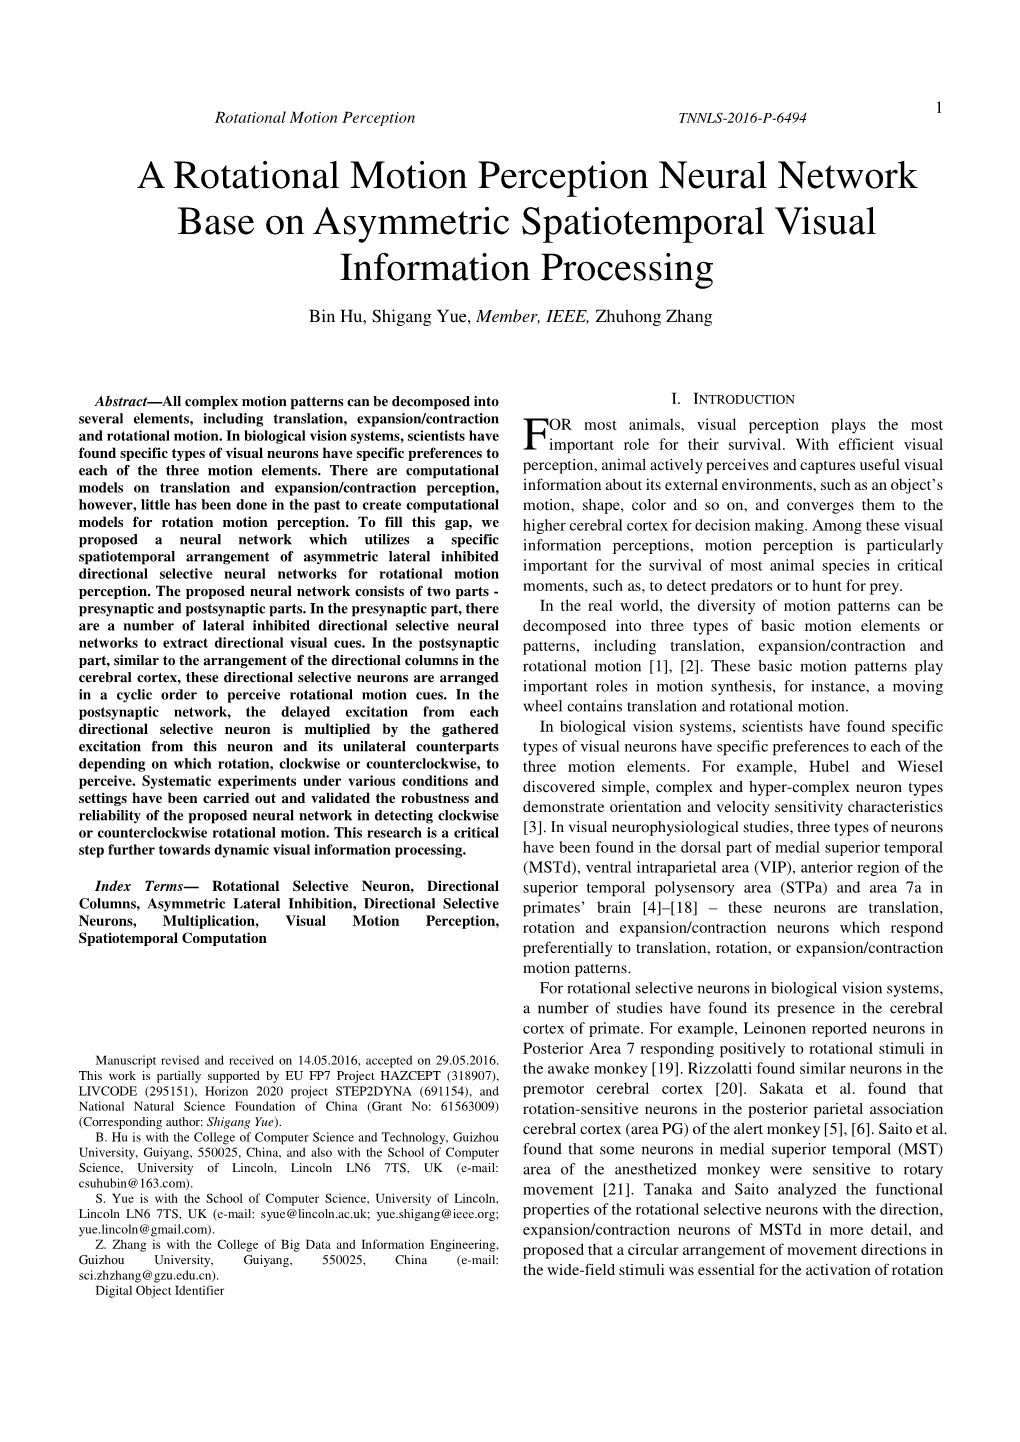 A Rotational Motion Perception Neural Network Base on Asymmetric Spatiotemporal Visual Information Processing